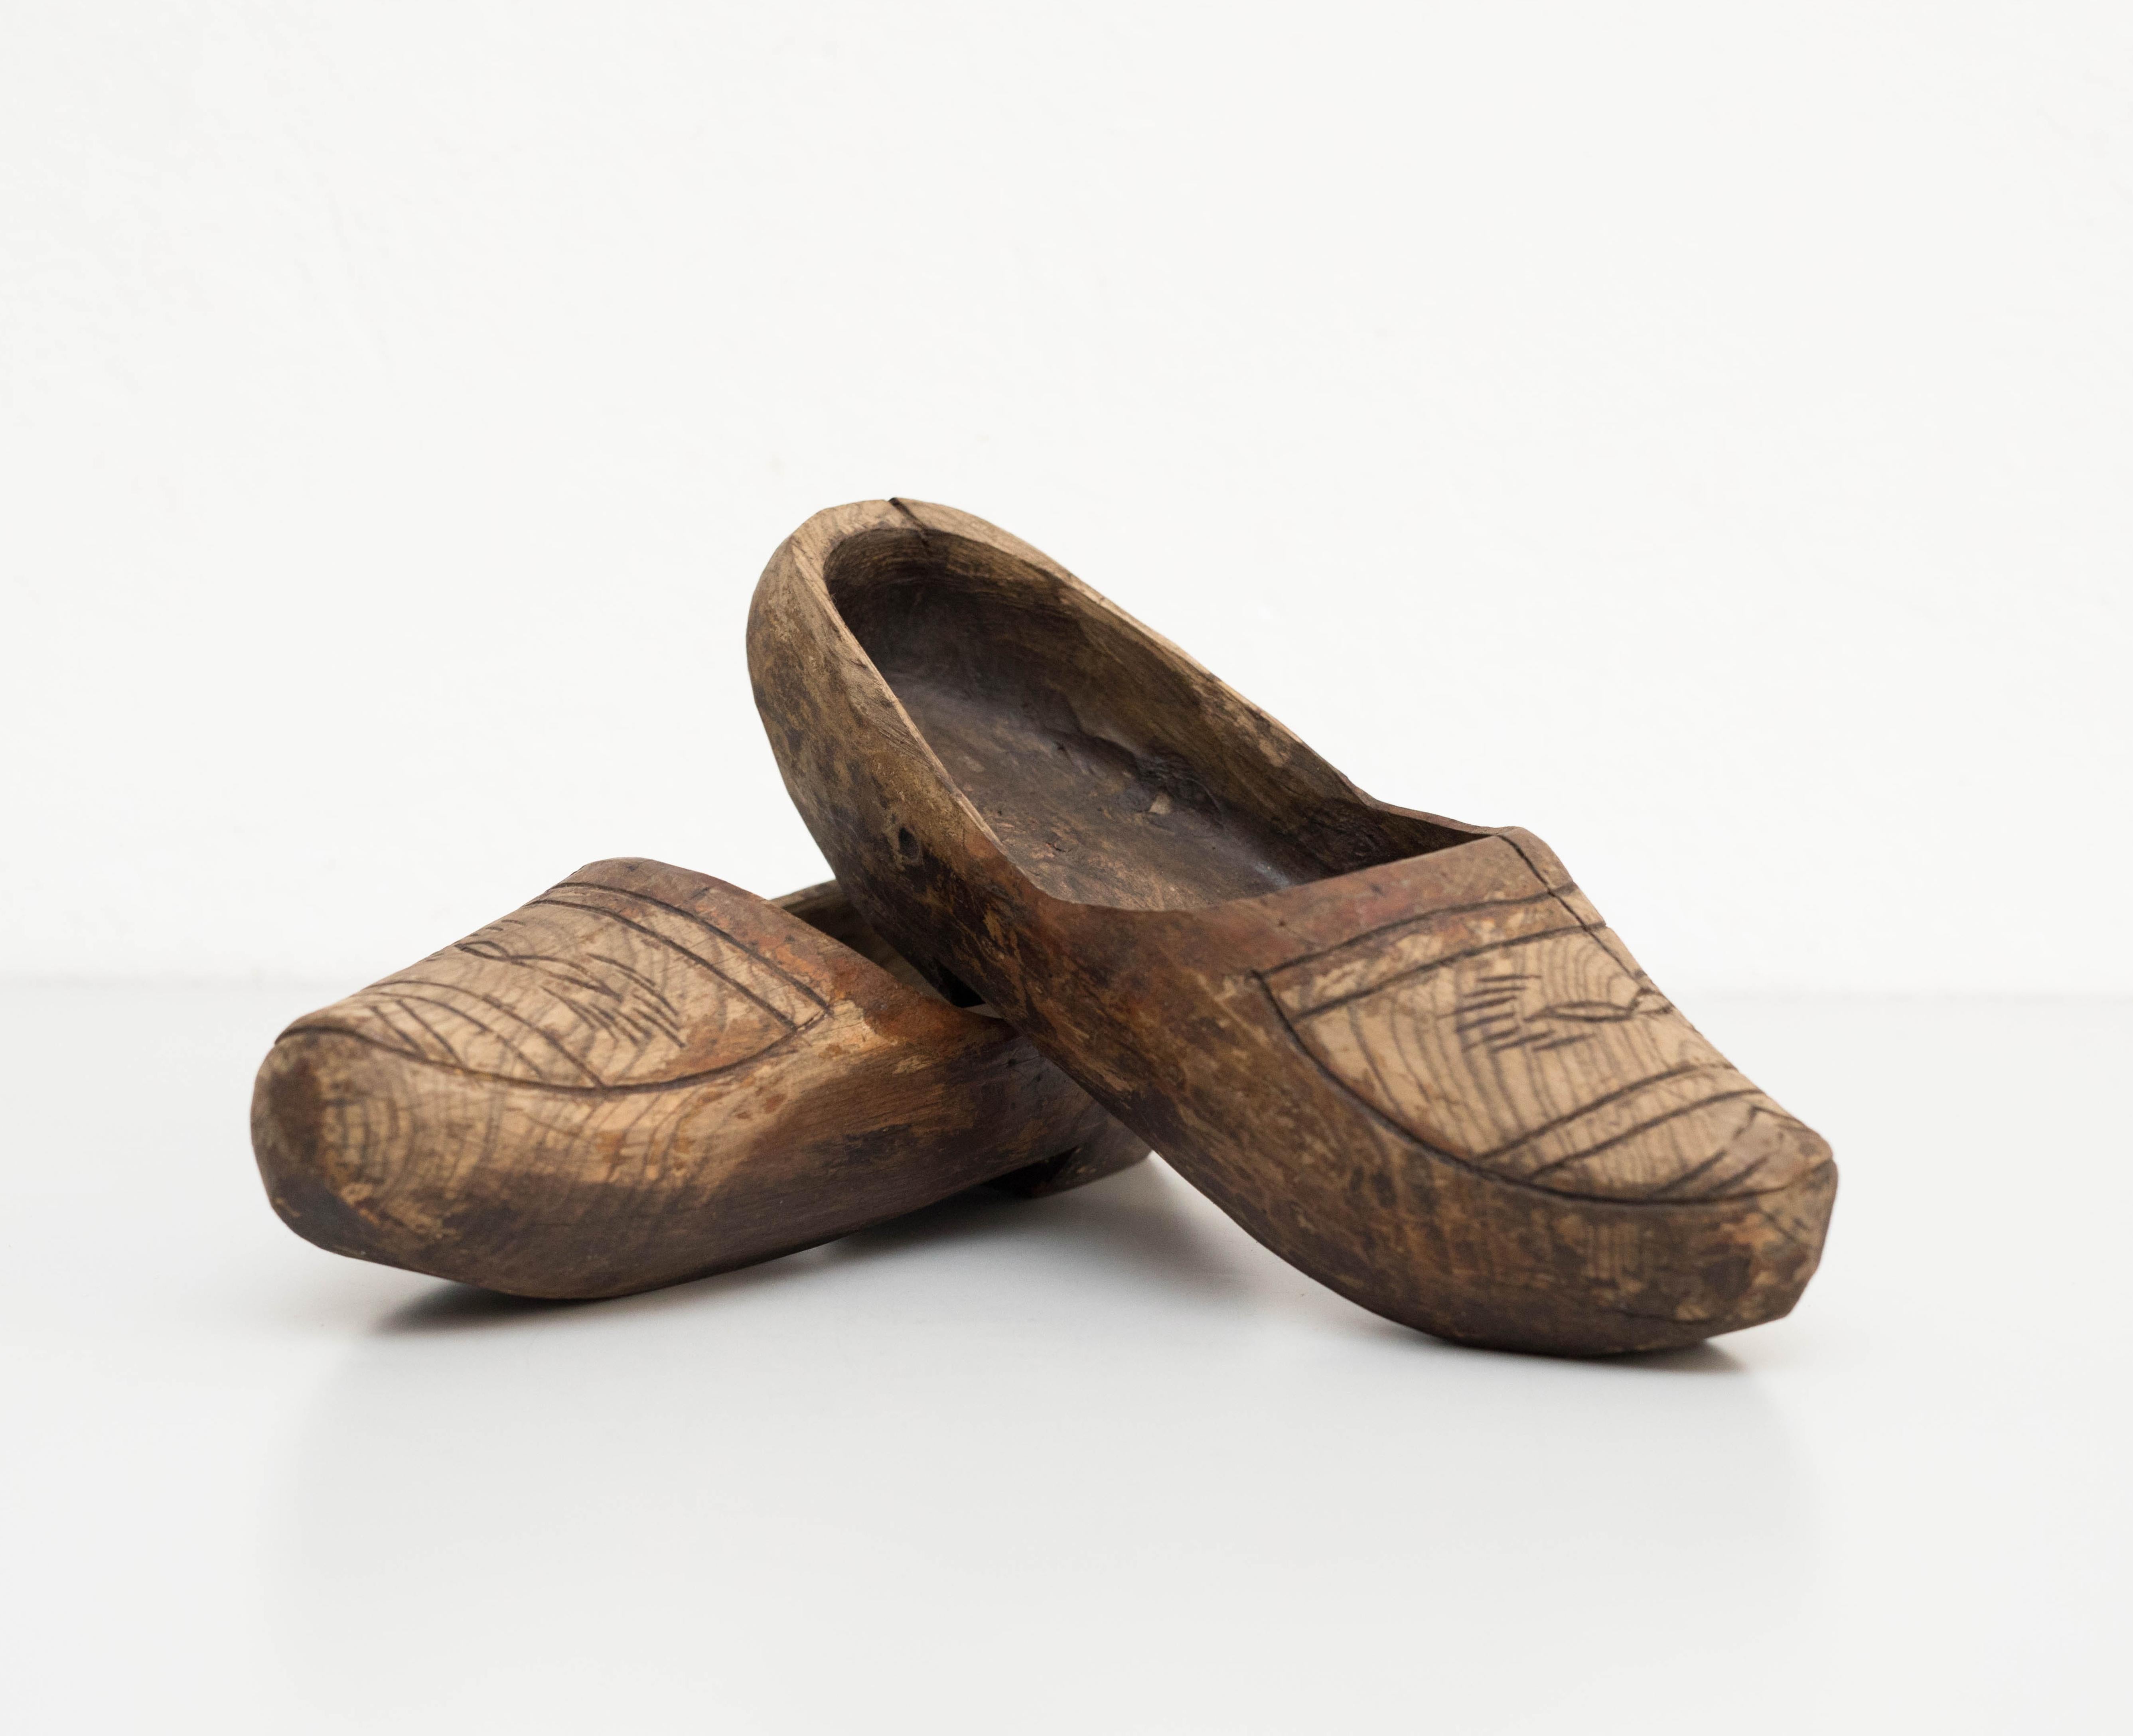 A Traditional Wood Clogs, 1960 Spain.

By unknown artist.

In original condition, with minor wear consistent of age and use, preserving a beautiful patina.